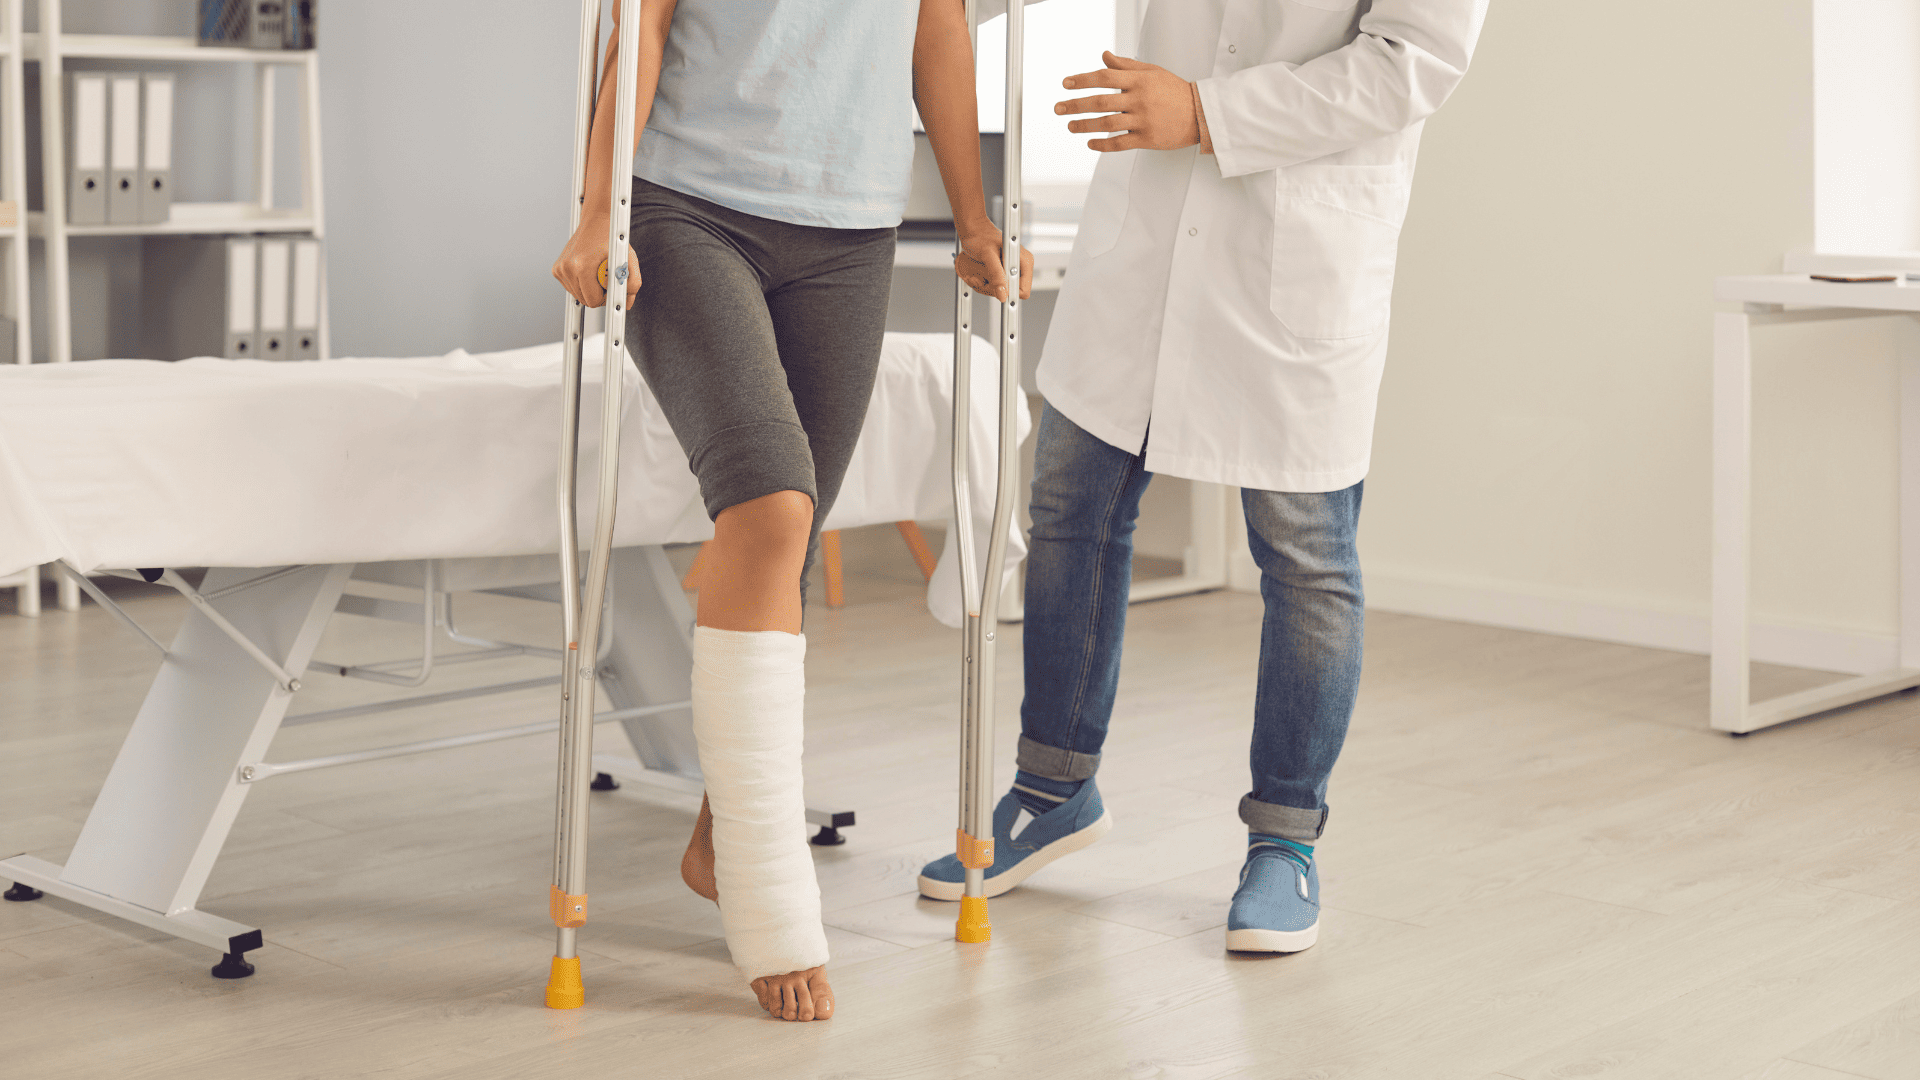 help reduce falls and injuries in hospitals